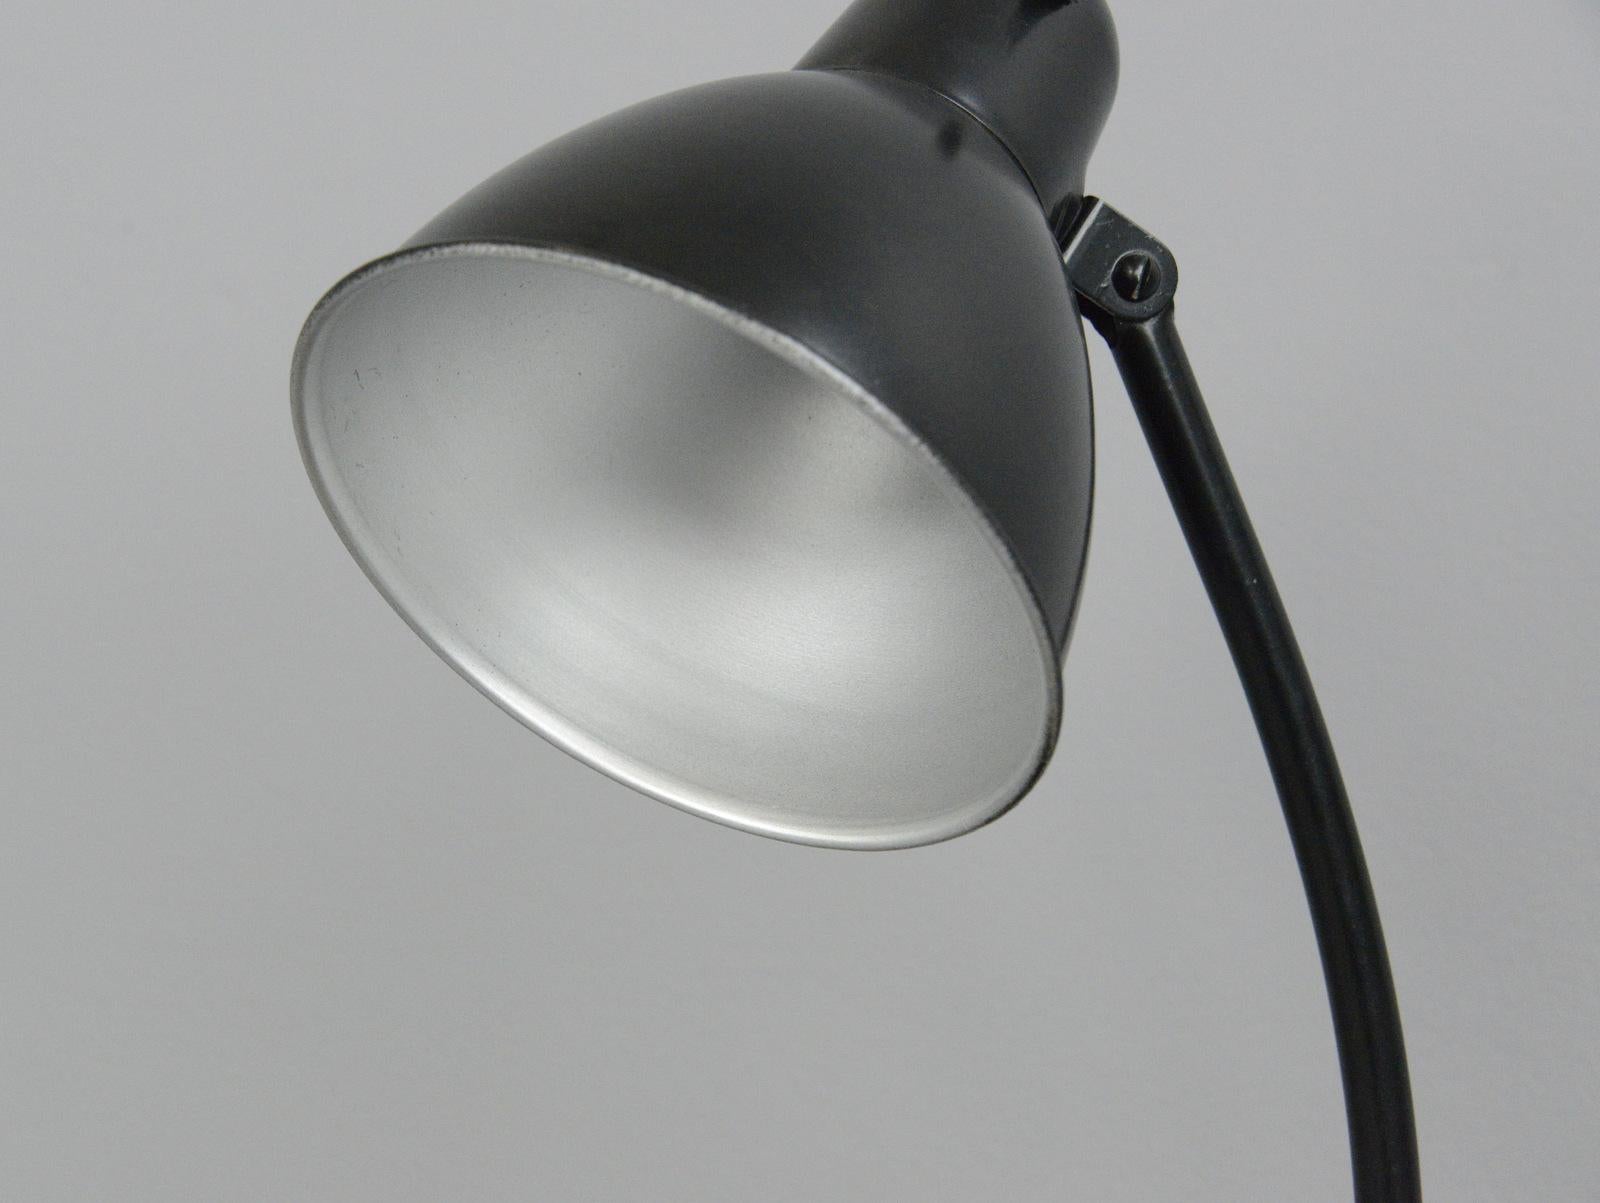 Bauhaus desk lamp by Siemens, circa 1930s

- Cast iron base
- Adjustable steel arm and shade
- Takes E27 fitting bulbs
- Produced by Siemens, Berlin
- German, 1930s
- Measures: 45cm tall x 21cm deep x 16cm wide

Condition report:

Fully